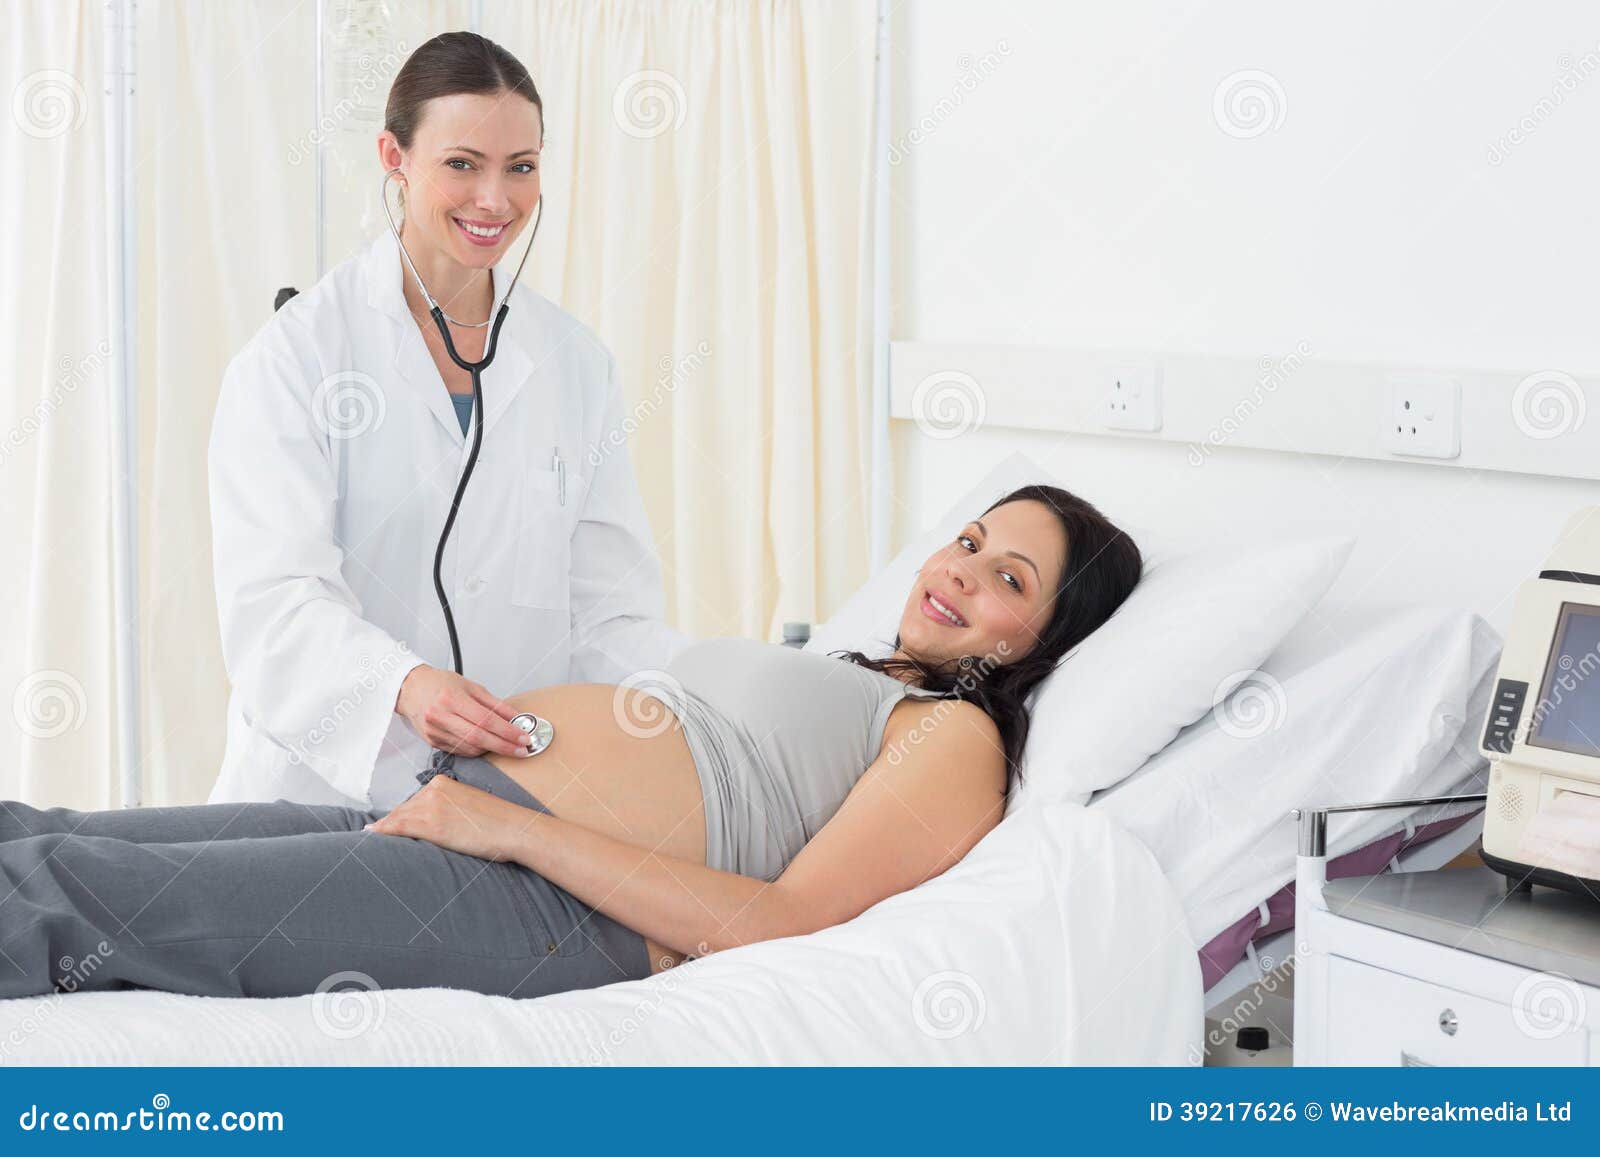 Pregnant Women In The Hospital 43